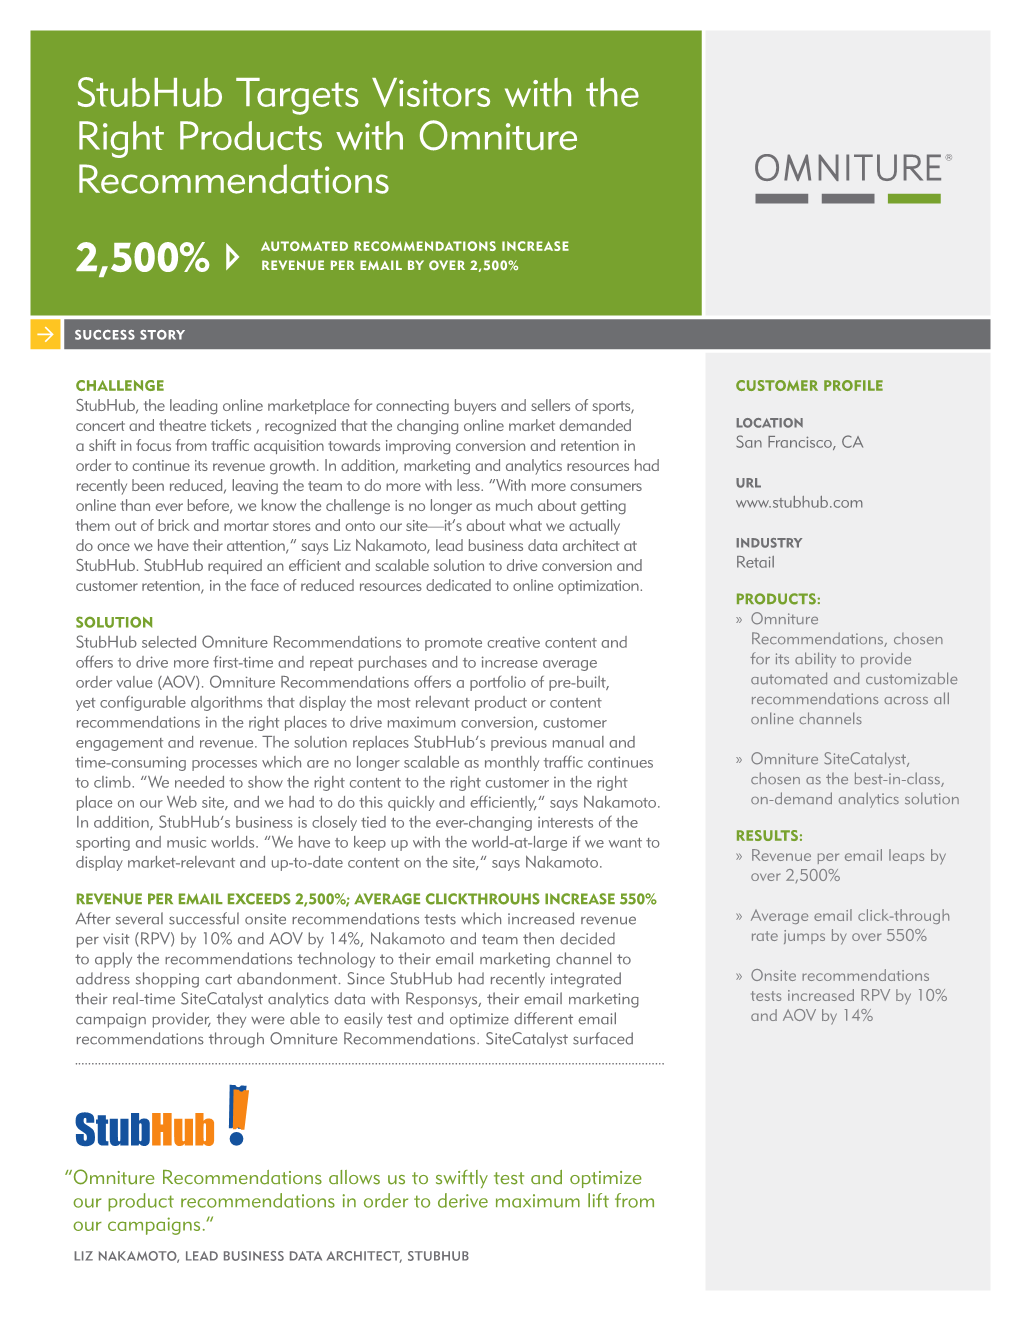 Stubhub Targets Visitors with the Right Products with Omniture Recommendations